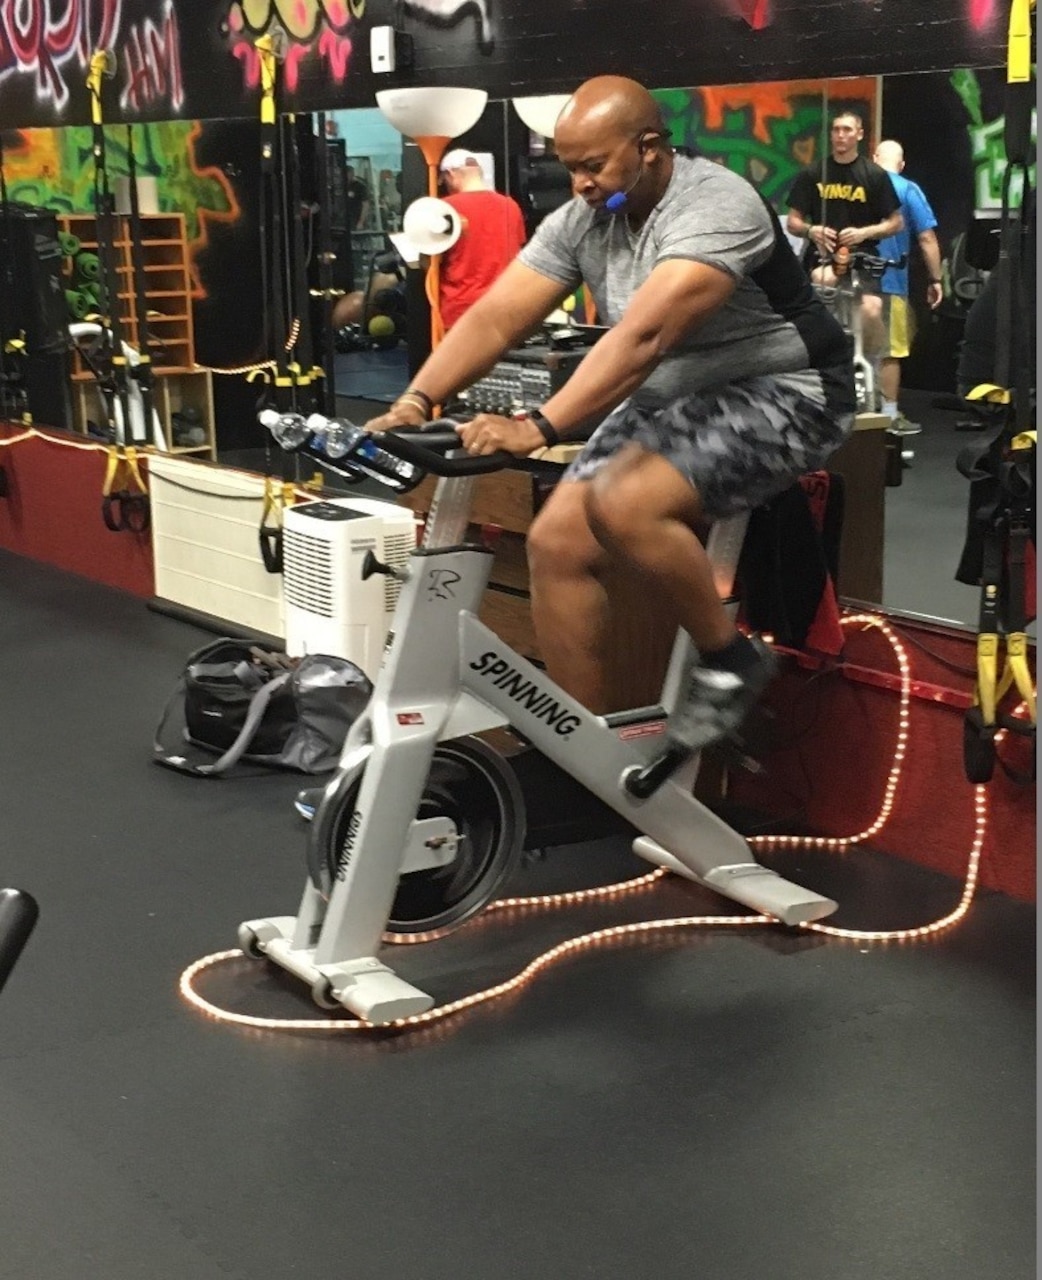 A soldier works out on a stationary bike